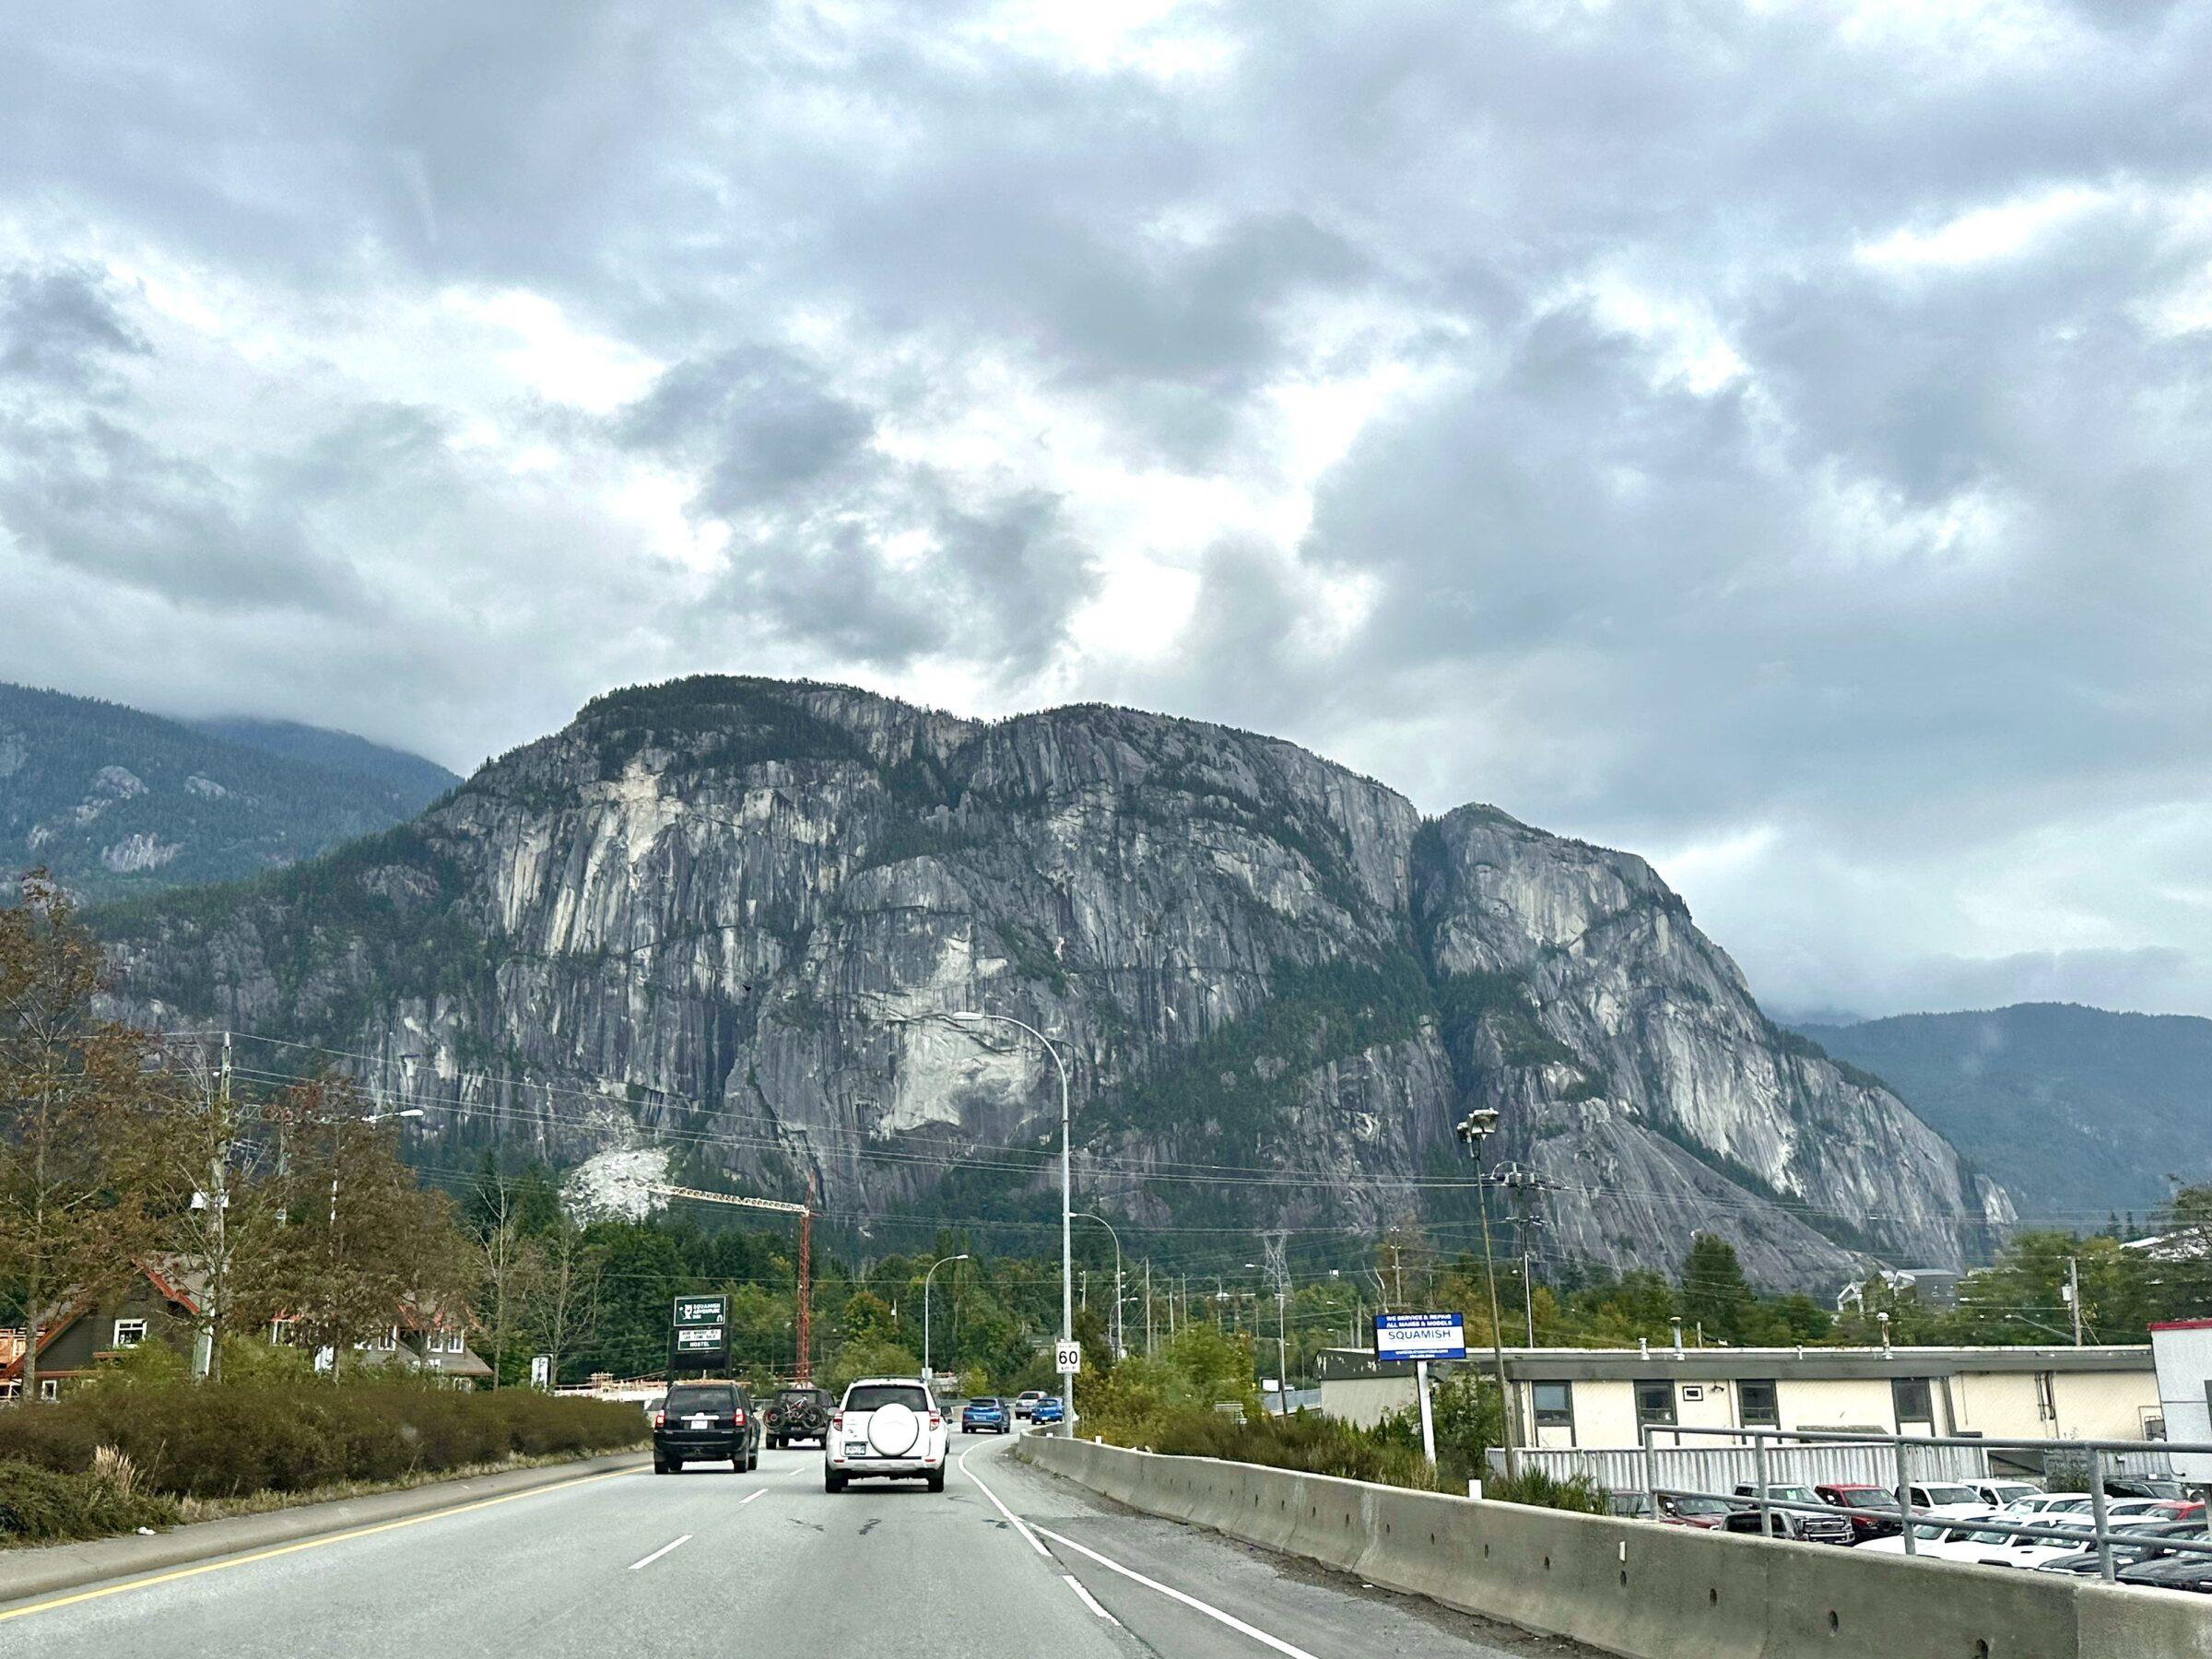 Image of the Squamish Chief taken through the front window of a car on the road